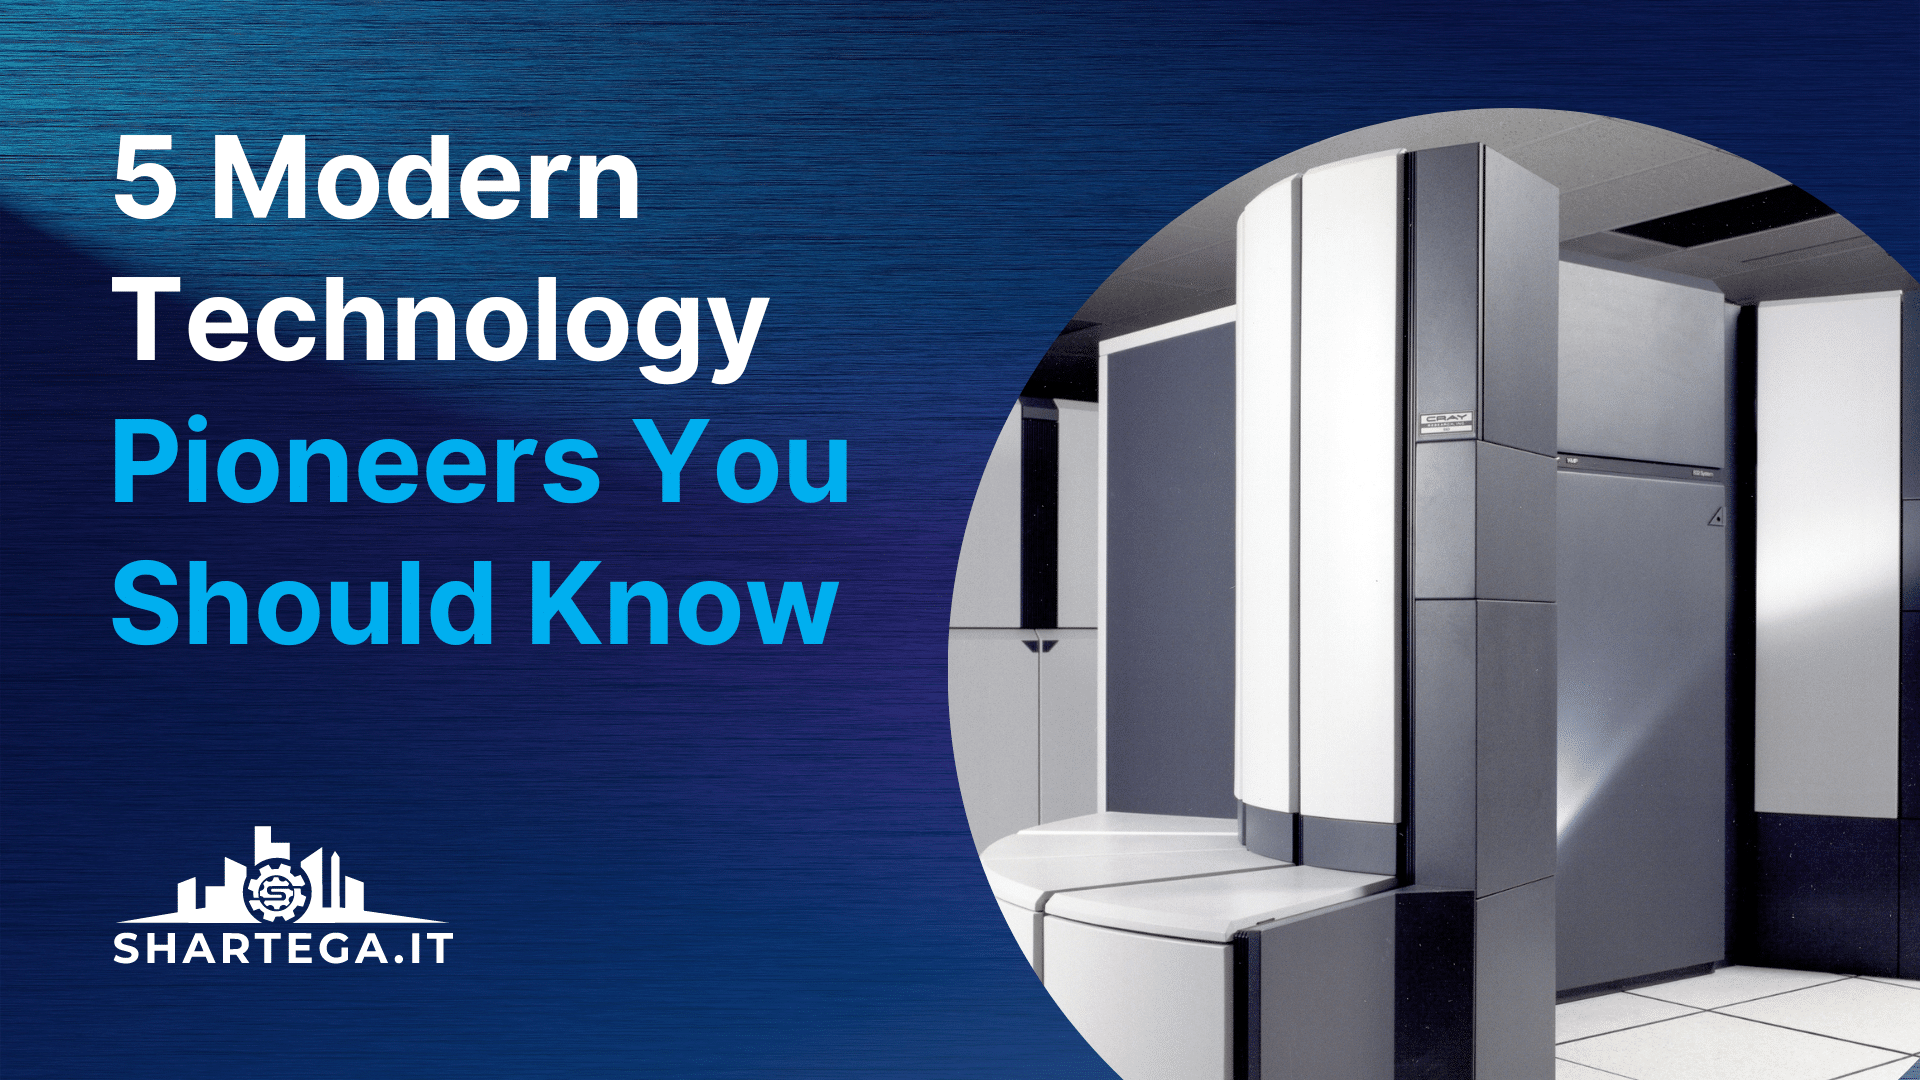 5 Modern Technology Pioneers You Should Know